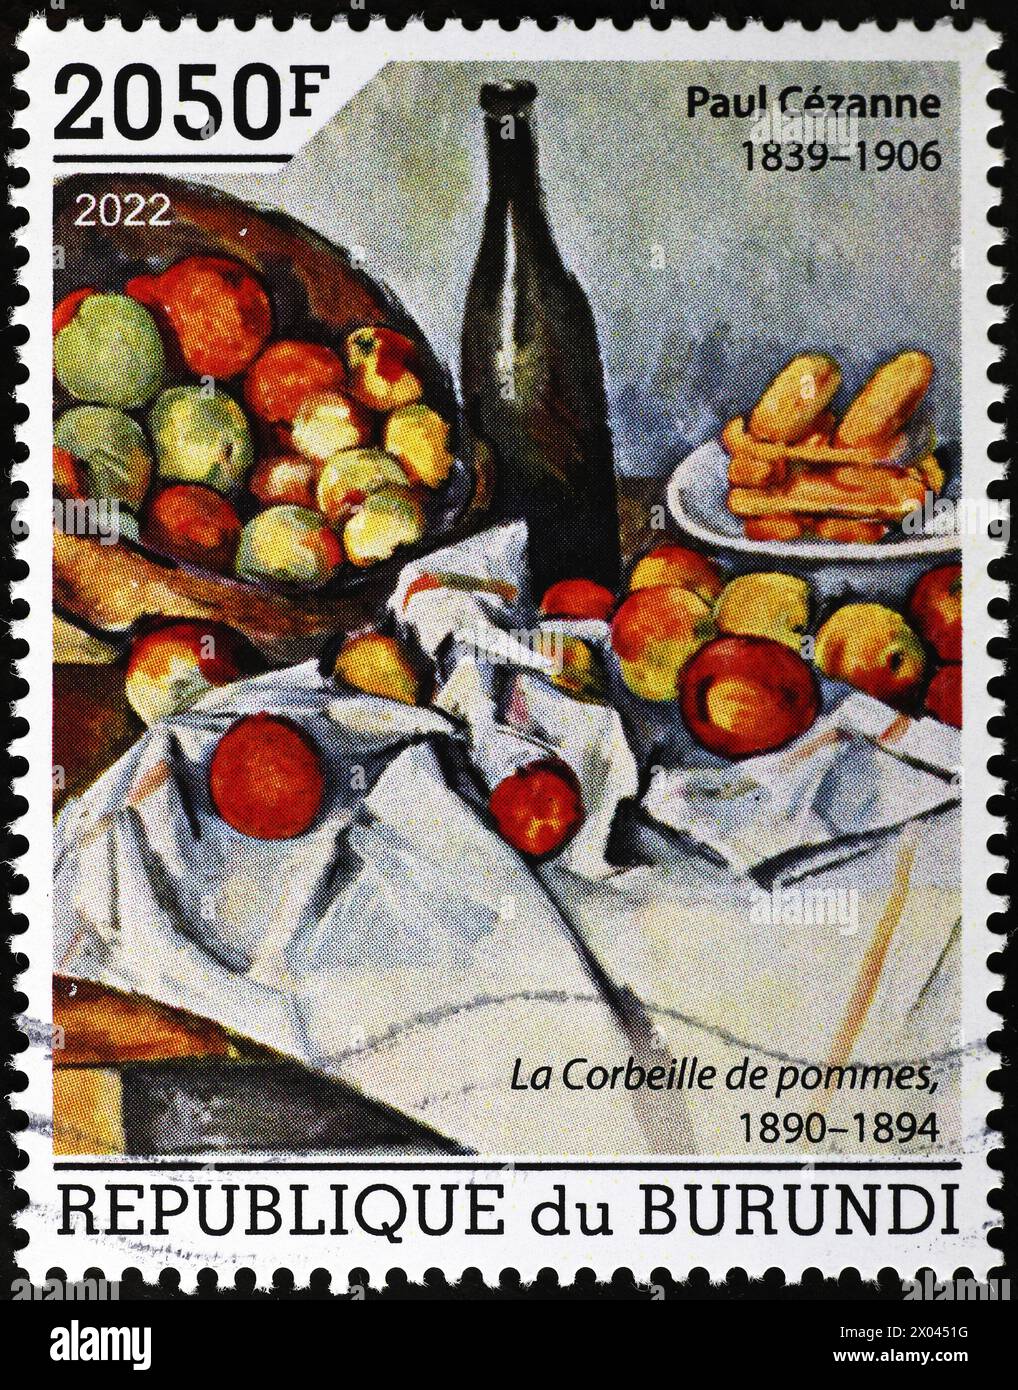 Painting by Paul Cezanne on postage stamp from Burundi Stock Photo